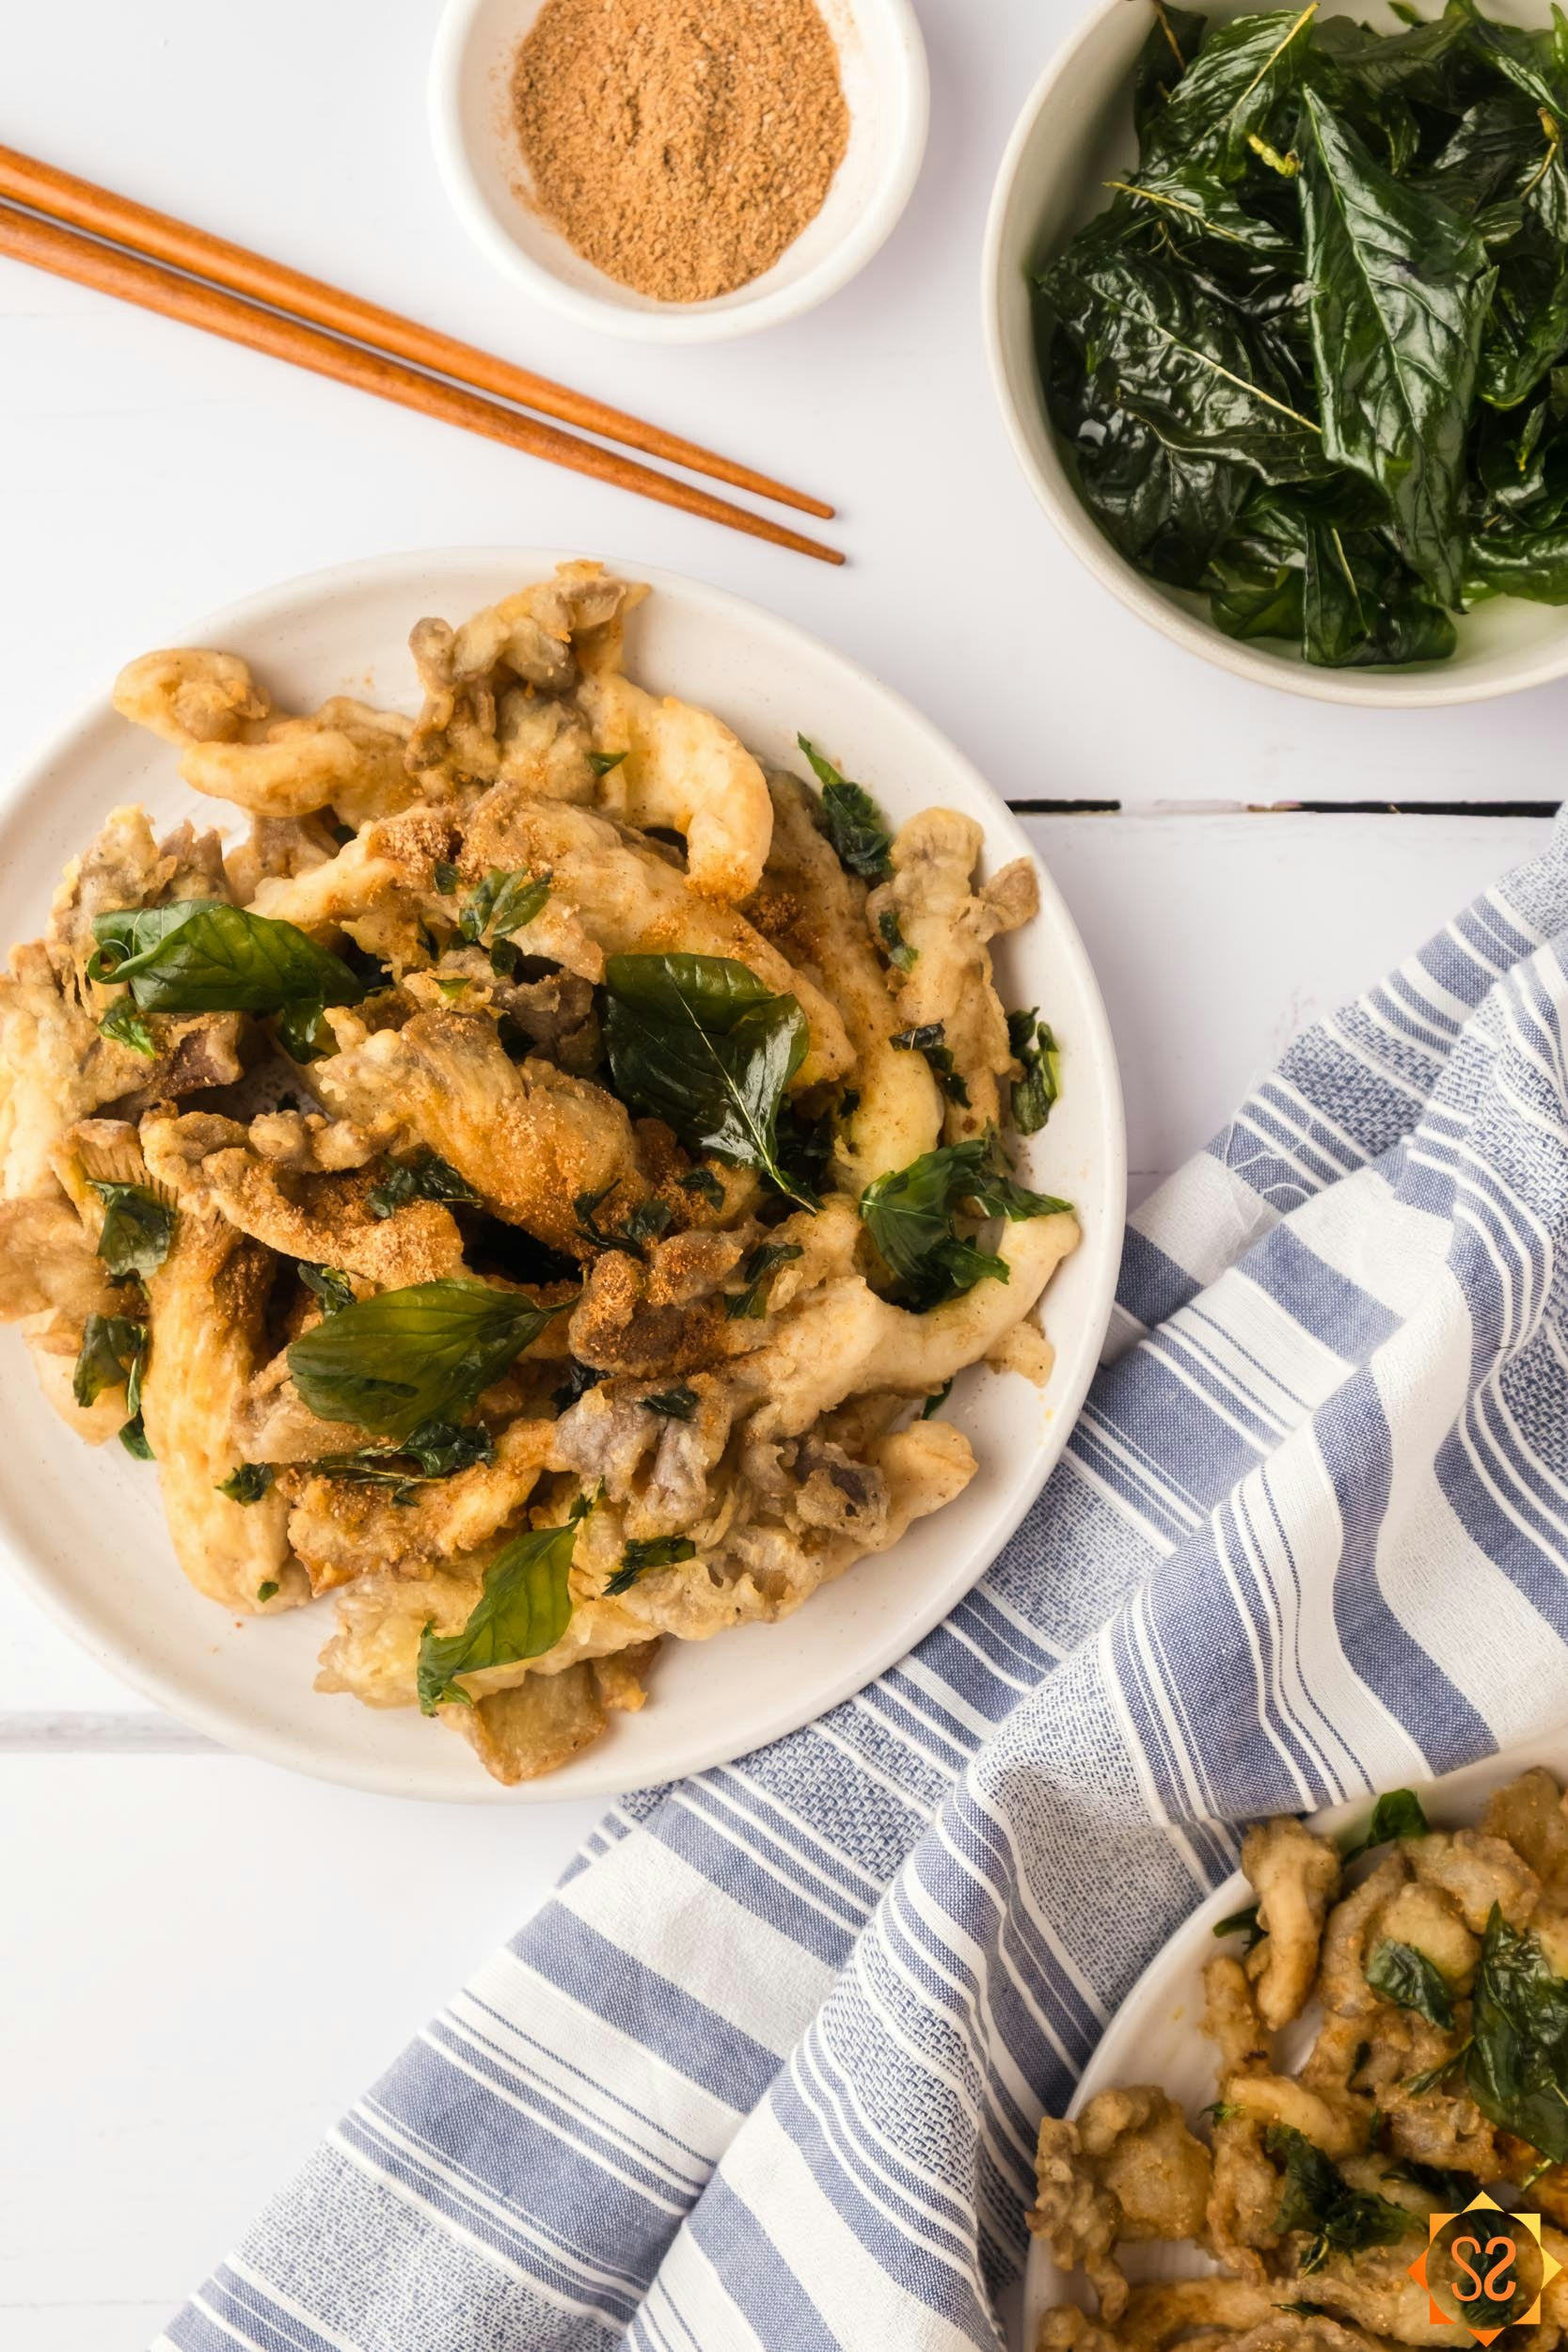 Fried oyster mushrooms on two plates with fried basil, seasoning powder, and chopsticks.